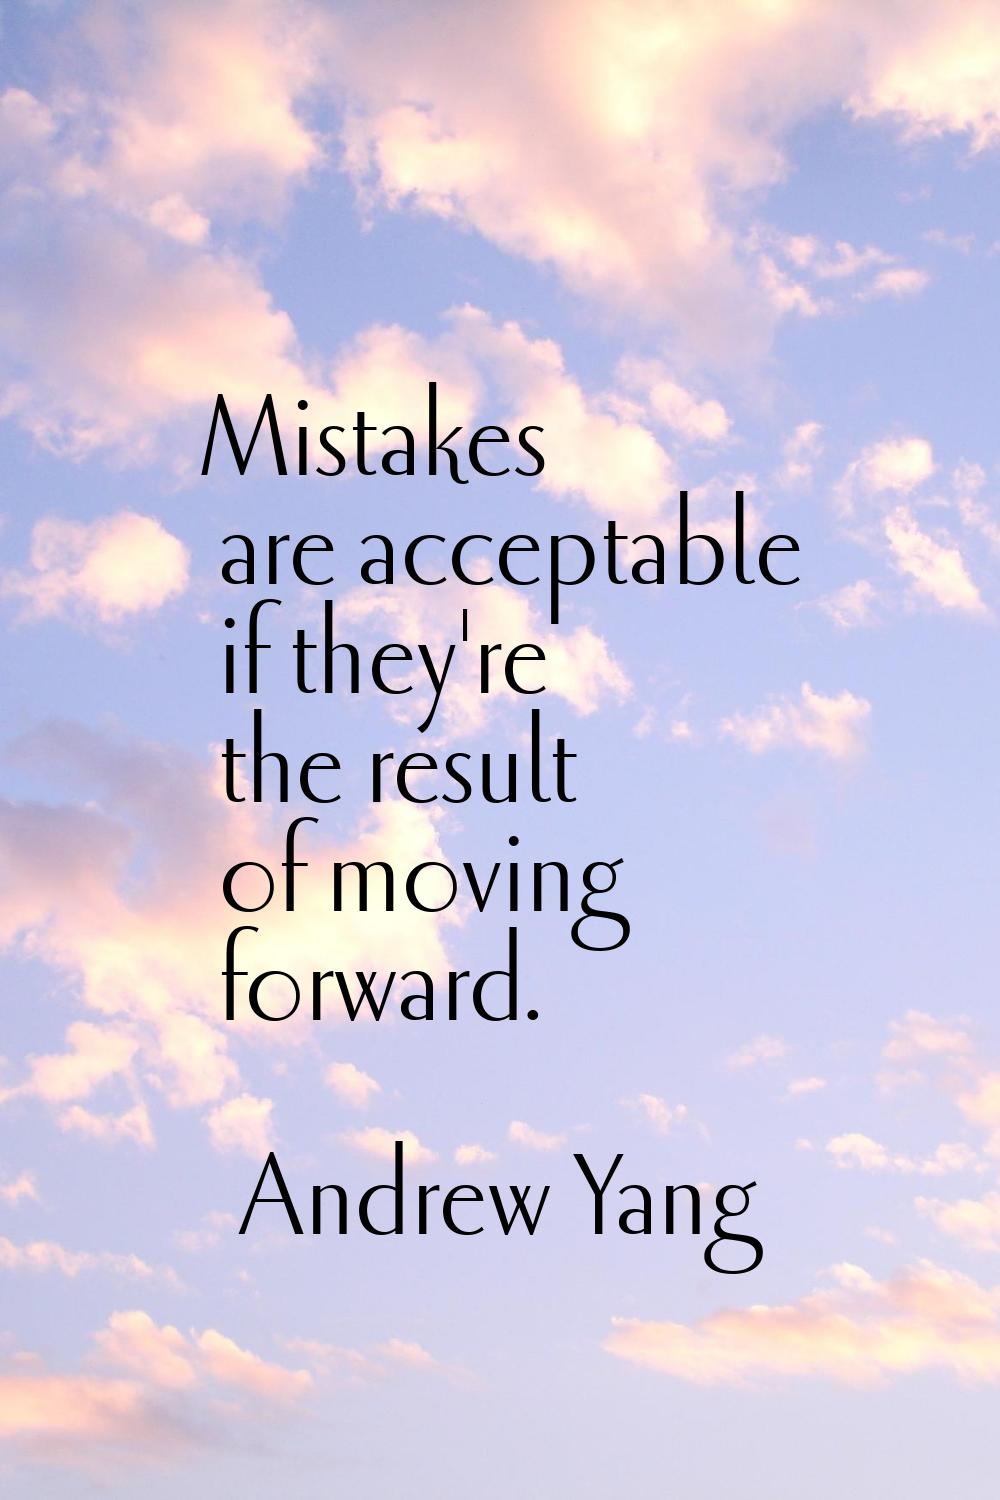 Mistakes are acceptable if they're the result of moving forward.